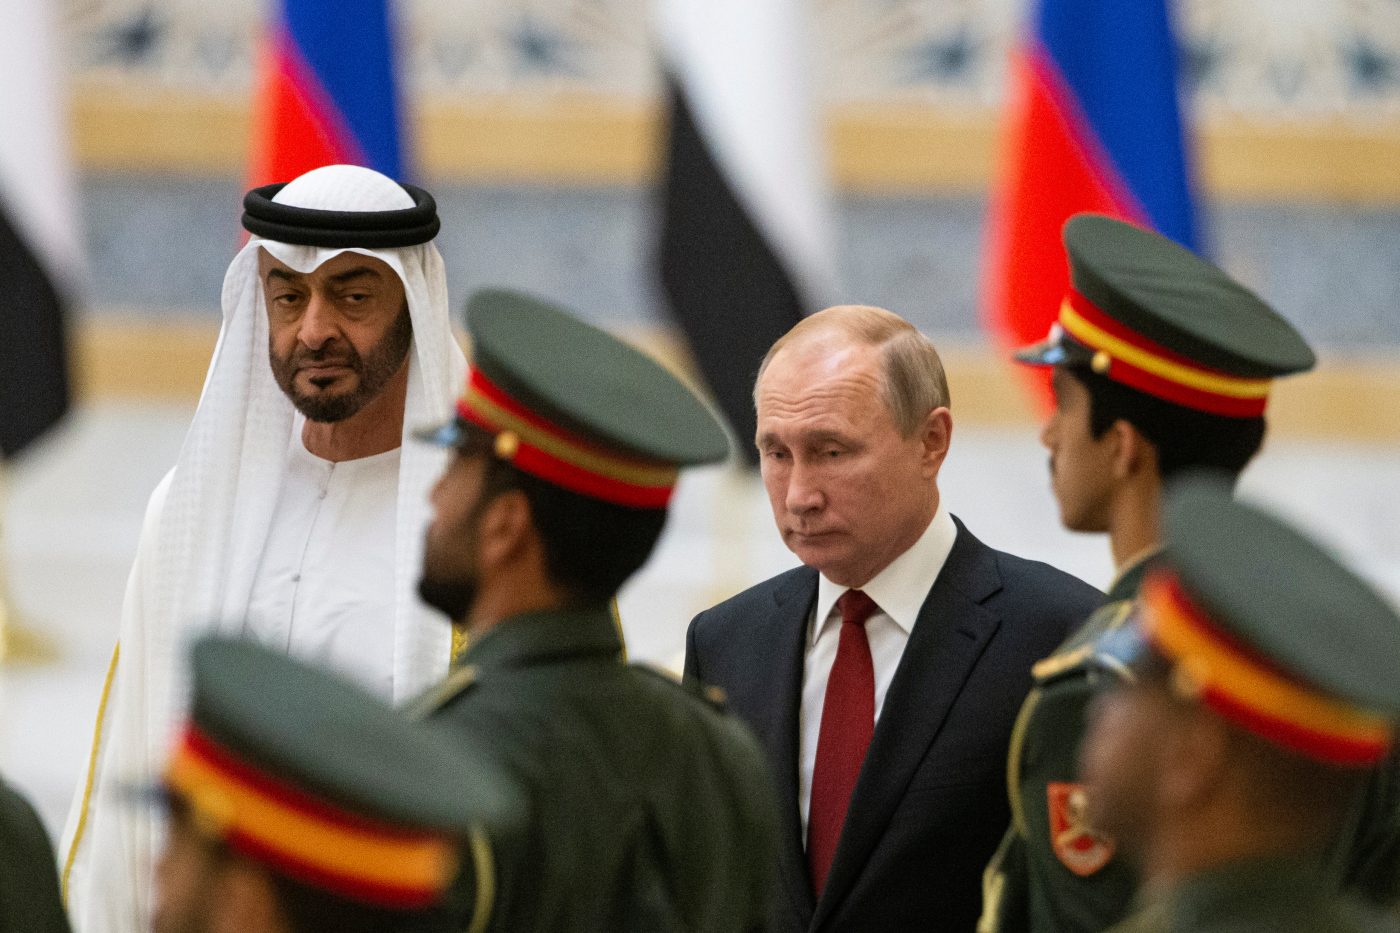 Photo: Russian President Vladimir Putin and Abu Dhabi Crown Prince Mohamed bin Zayed al-Nahyan attend the official welcome ceremony in Abu Dhabi, United Arab Emirates, October 15, 2019. Credit: Alexander Zemlianichenko/ Pool via REUTERS